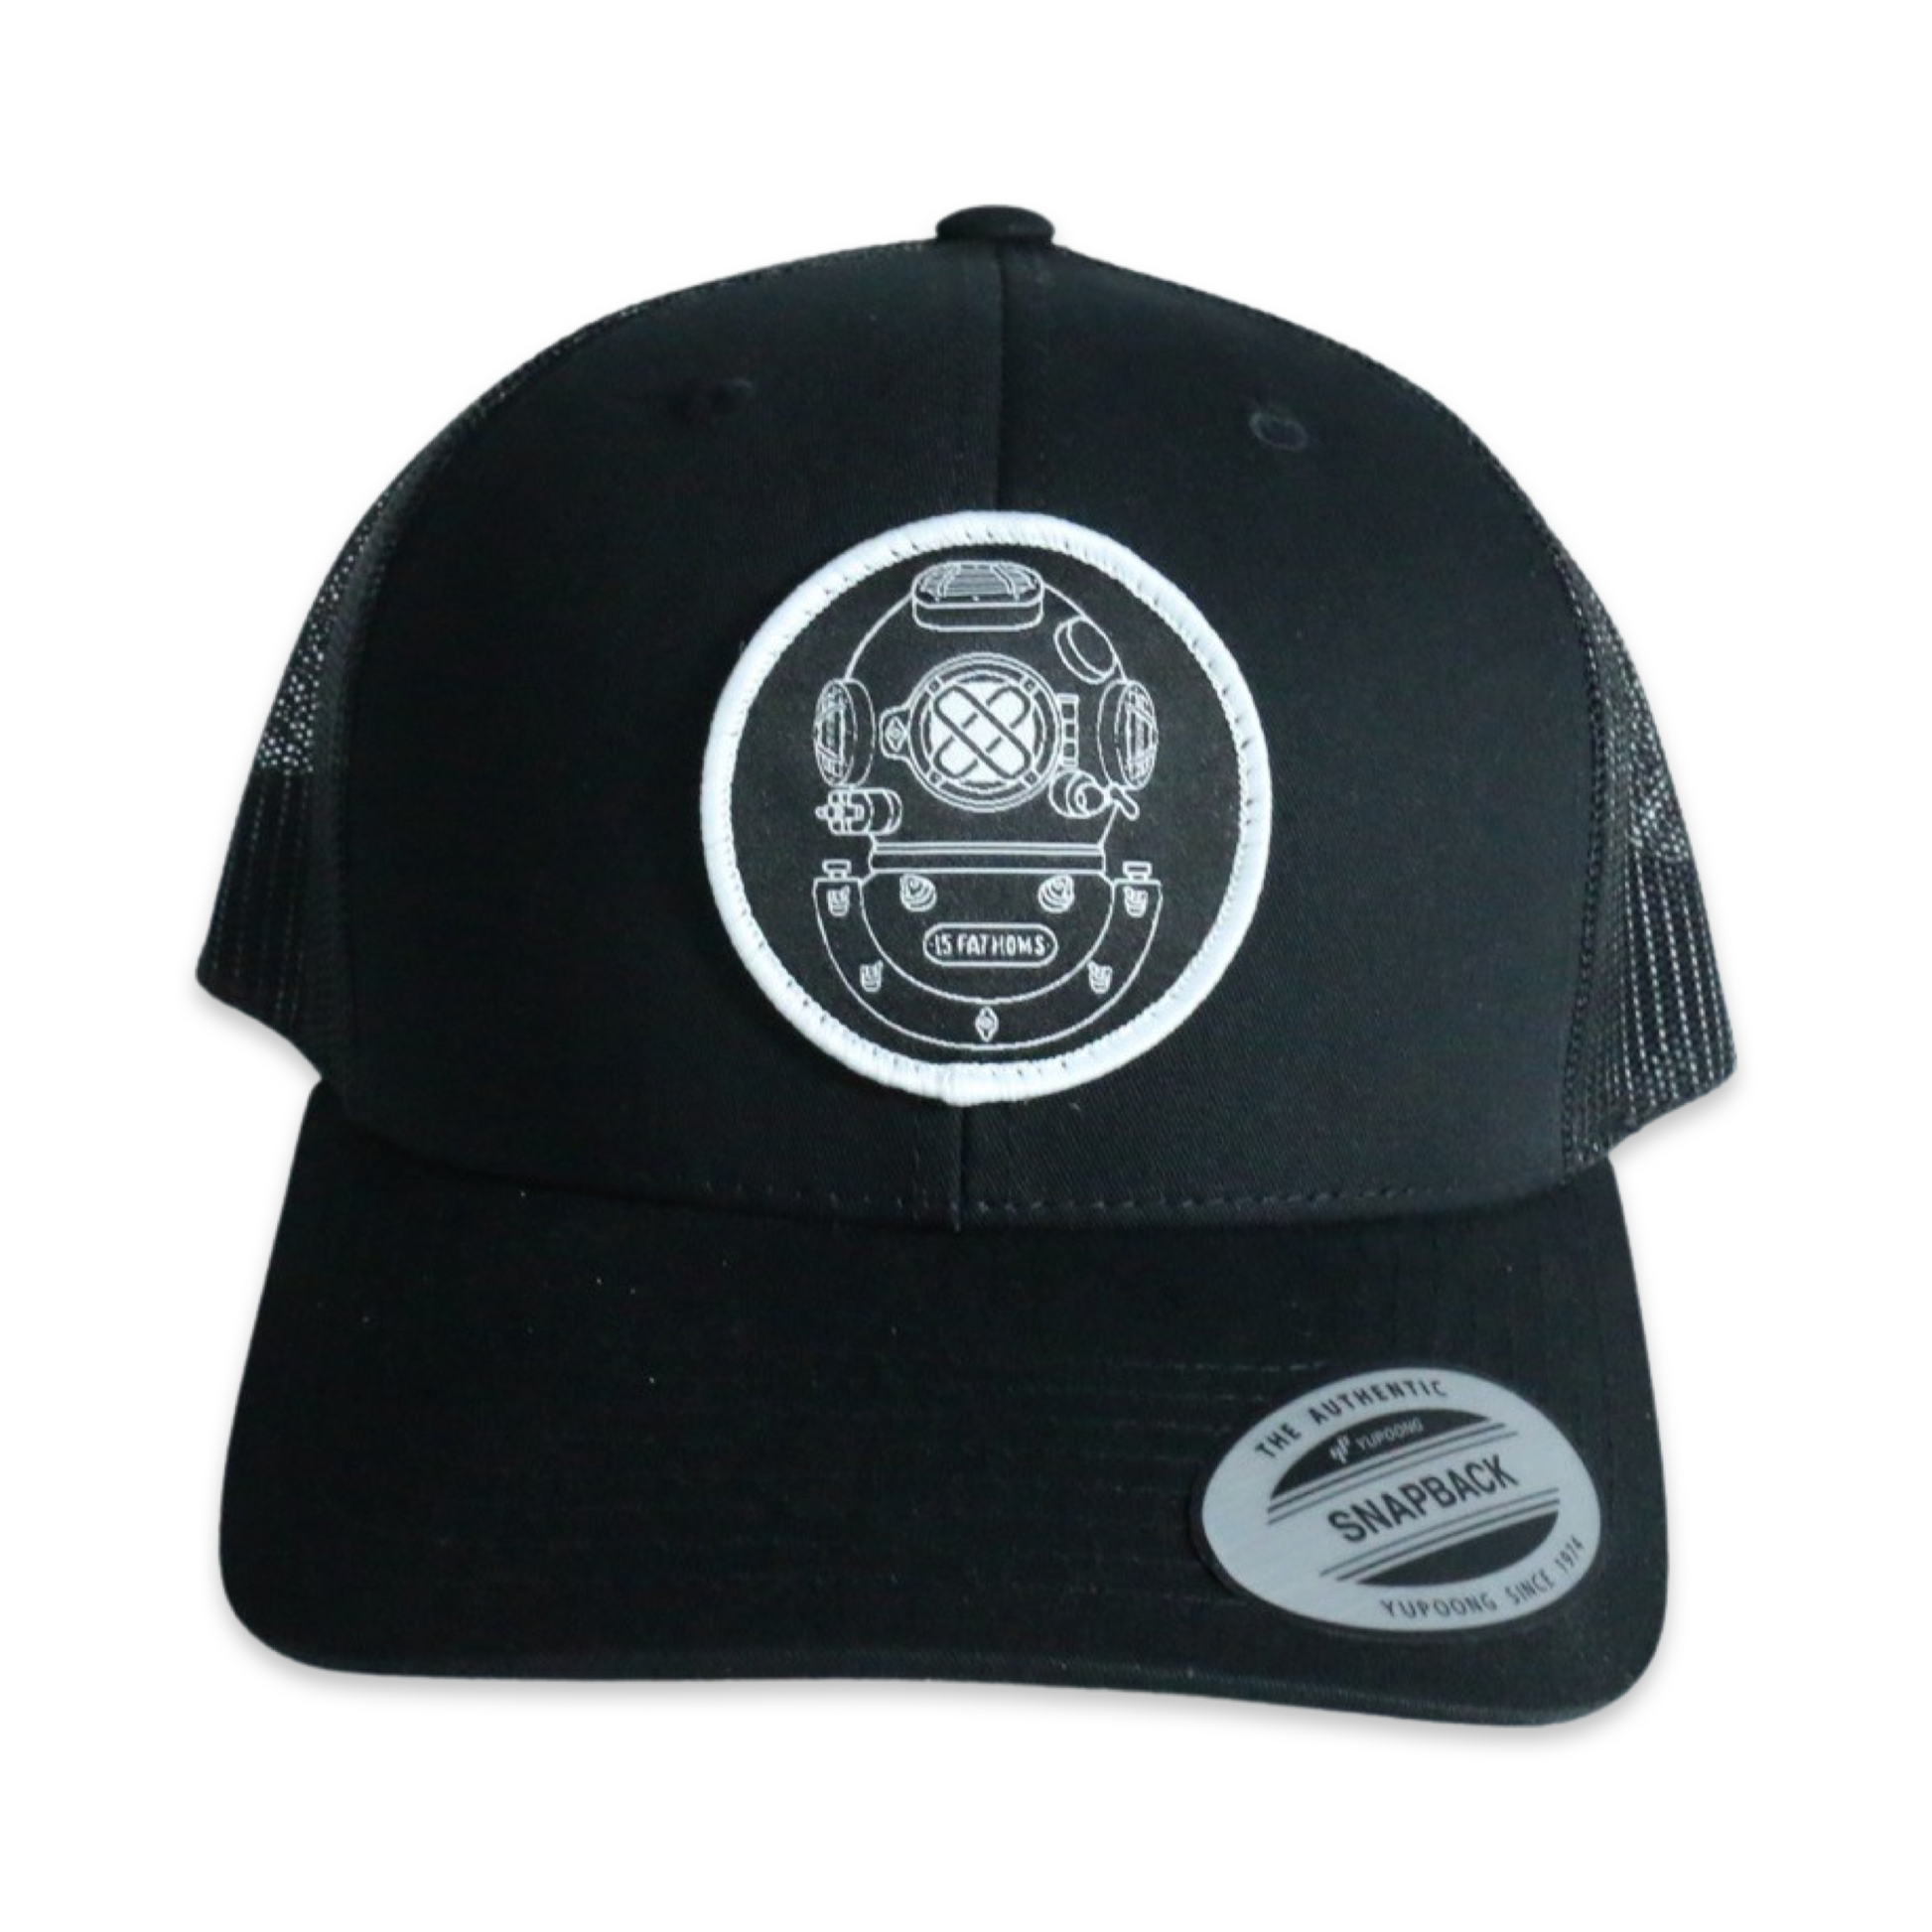 Represent your love for the deep!  This hat features our signature MK-5 design made of a high detail woven patch which was sewn on by Flexfit. These are high quality, look great, and fit perfectly.  Keep your head cool with a mesh back, and a snapback allows you to adjust to your perfect fit.  